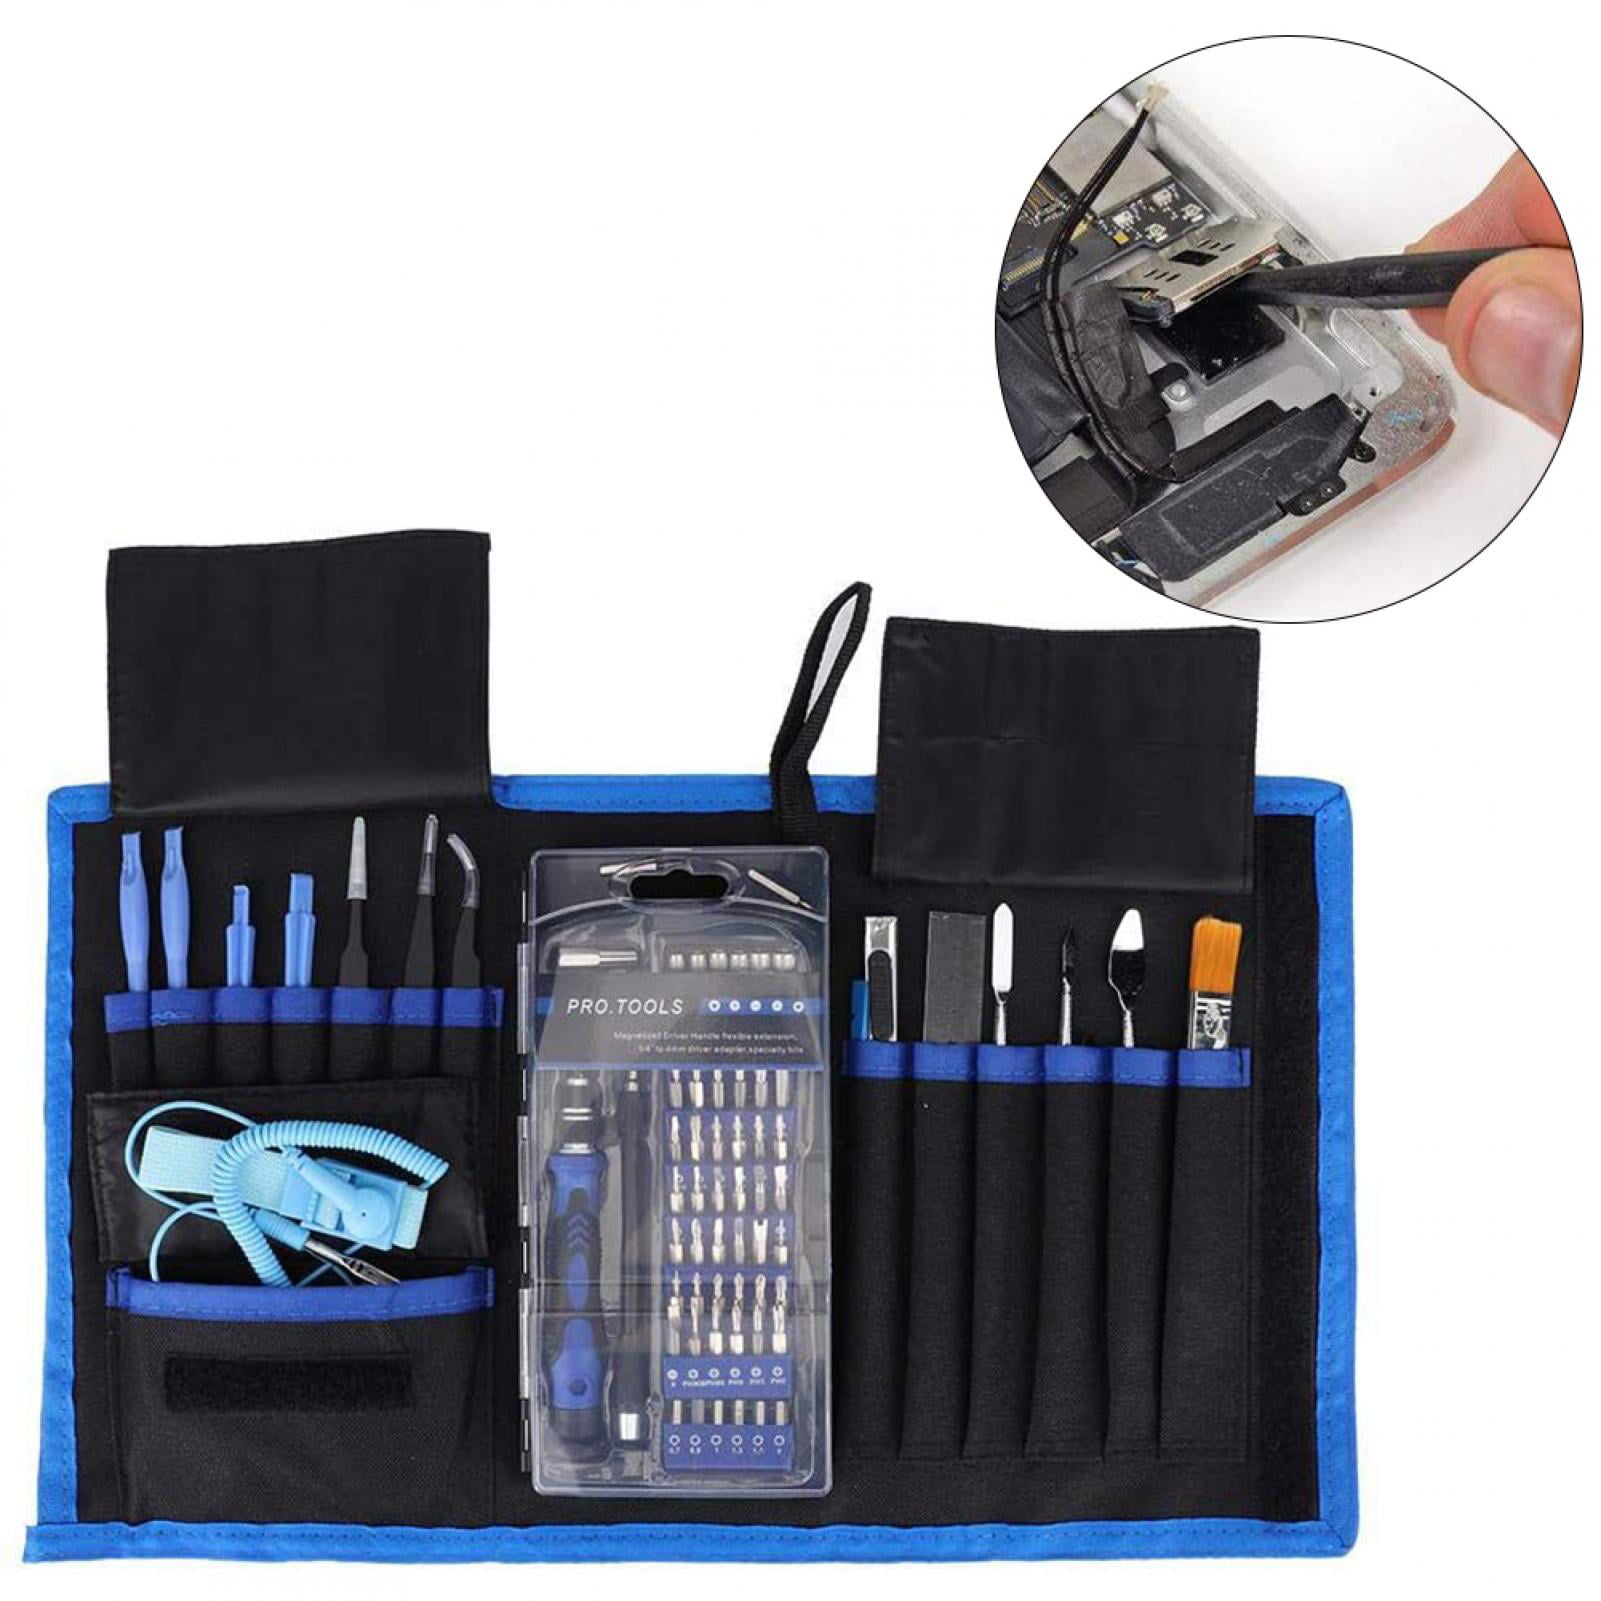 Macbook Game Console Xbox Black Tablet Syntus Precision Screwdriver Set Cellphone Magnetic Driver Electronics Repair Tool Kit for iPhone PC 63 in 1 with 57 Bits Screwdriver Kit